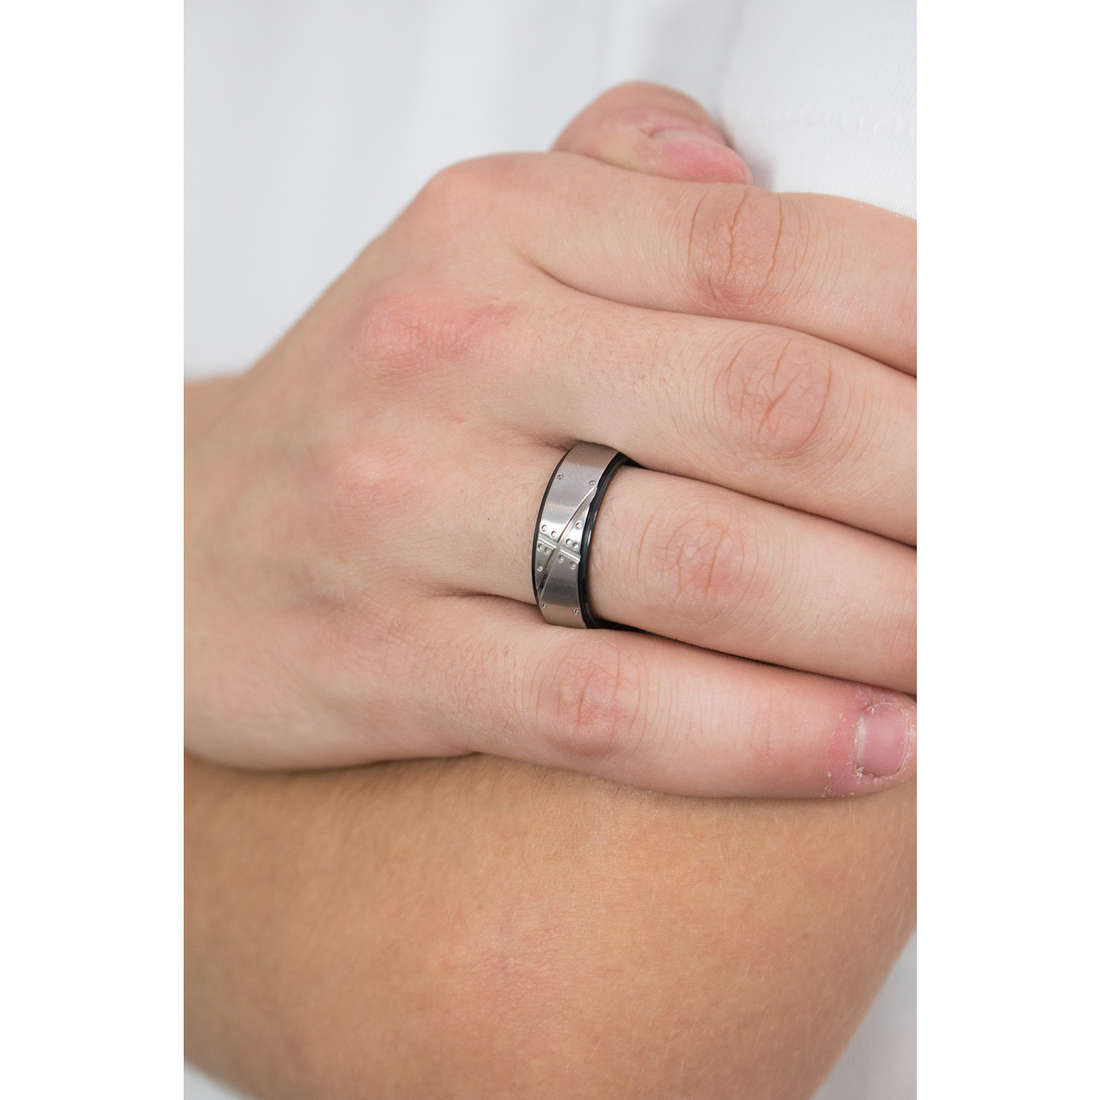 Sector rings Row man SACX07023 wearing